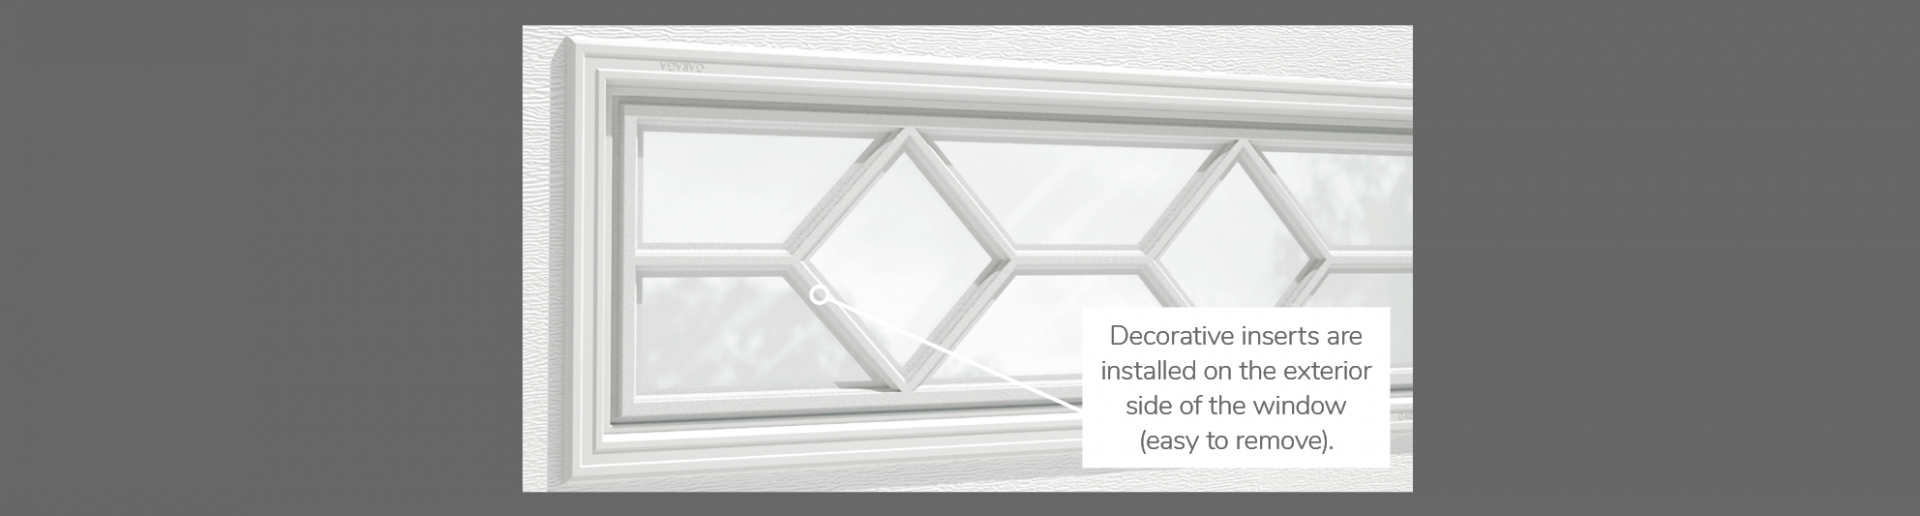 Waterton Decorative Insert, 40" x 13", available for door R-16, R-12, 2 layers - Polystyrene and Non-insulated